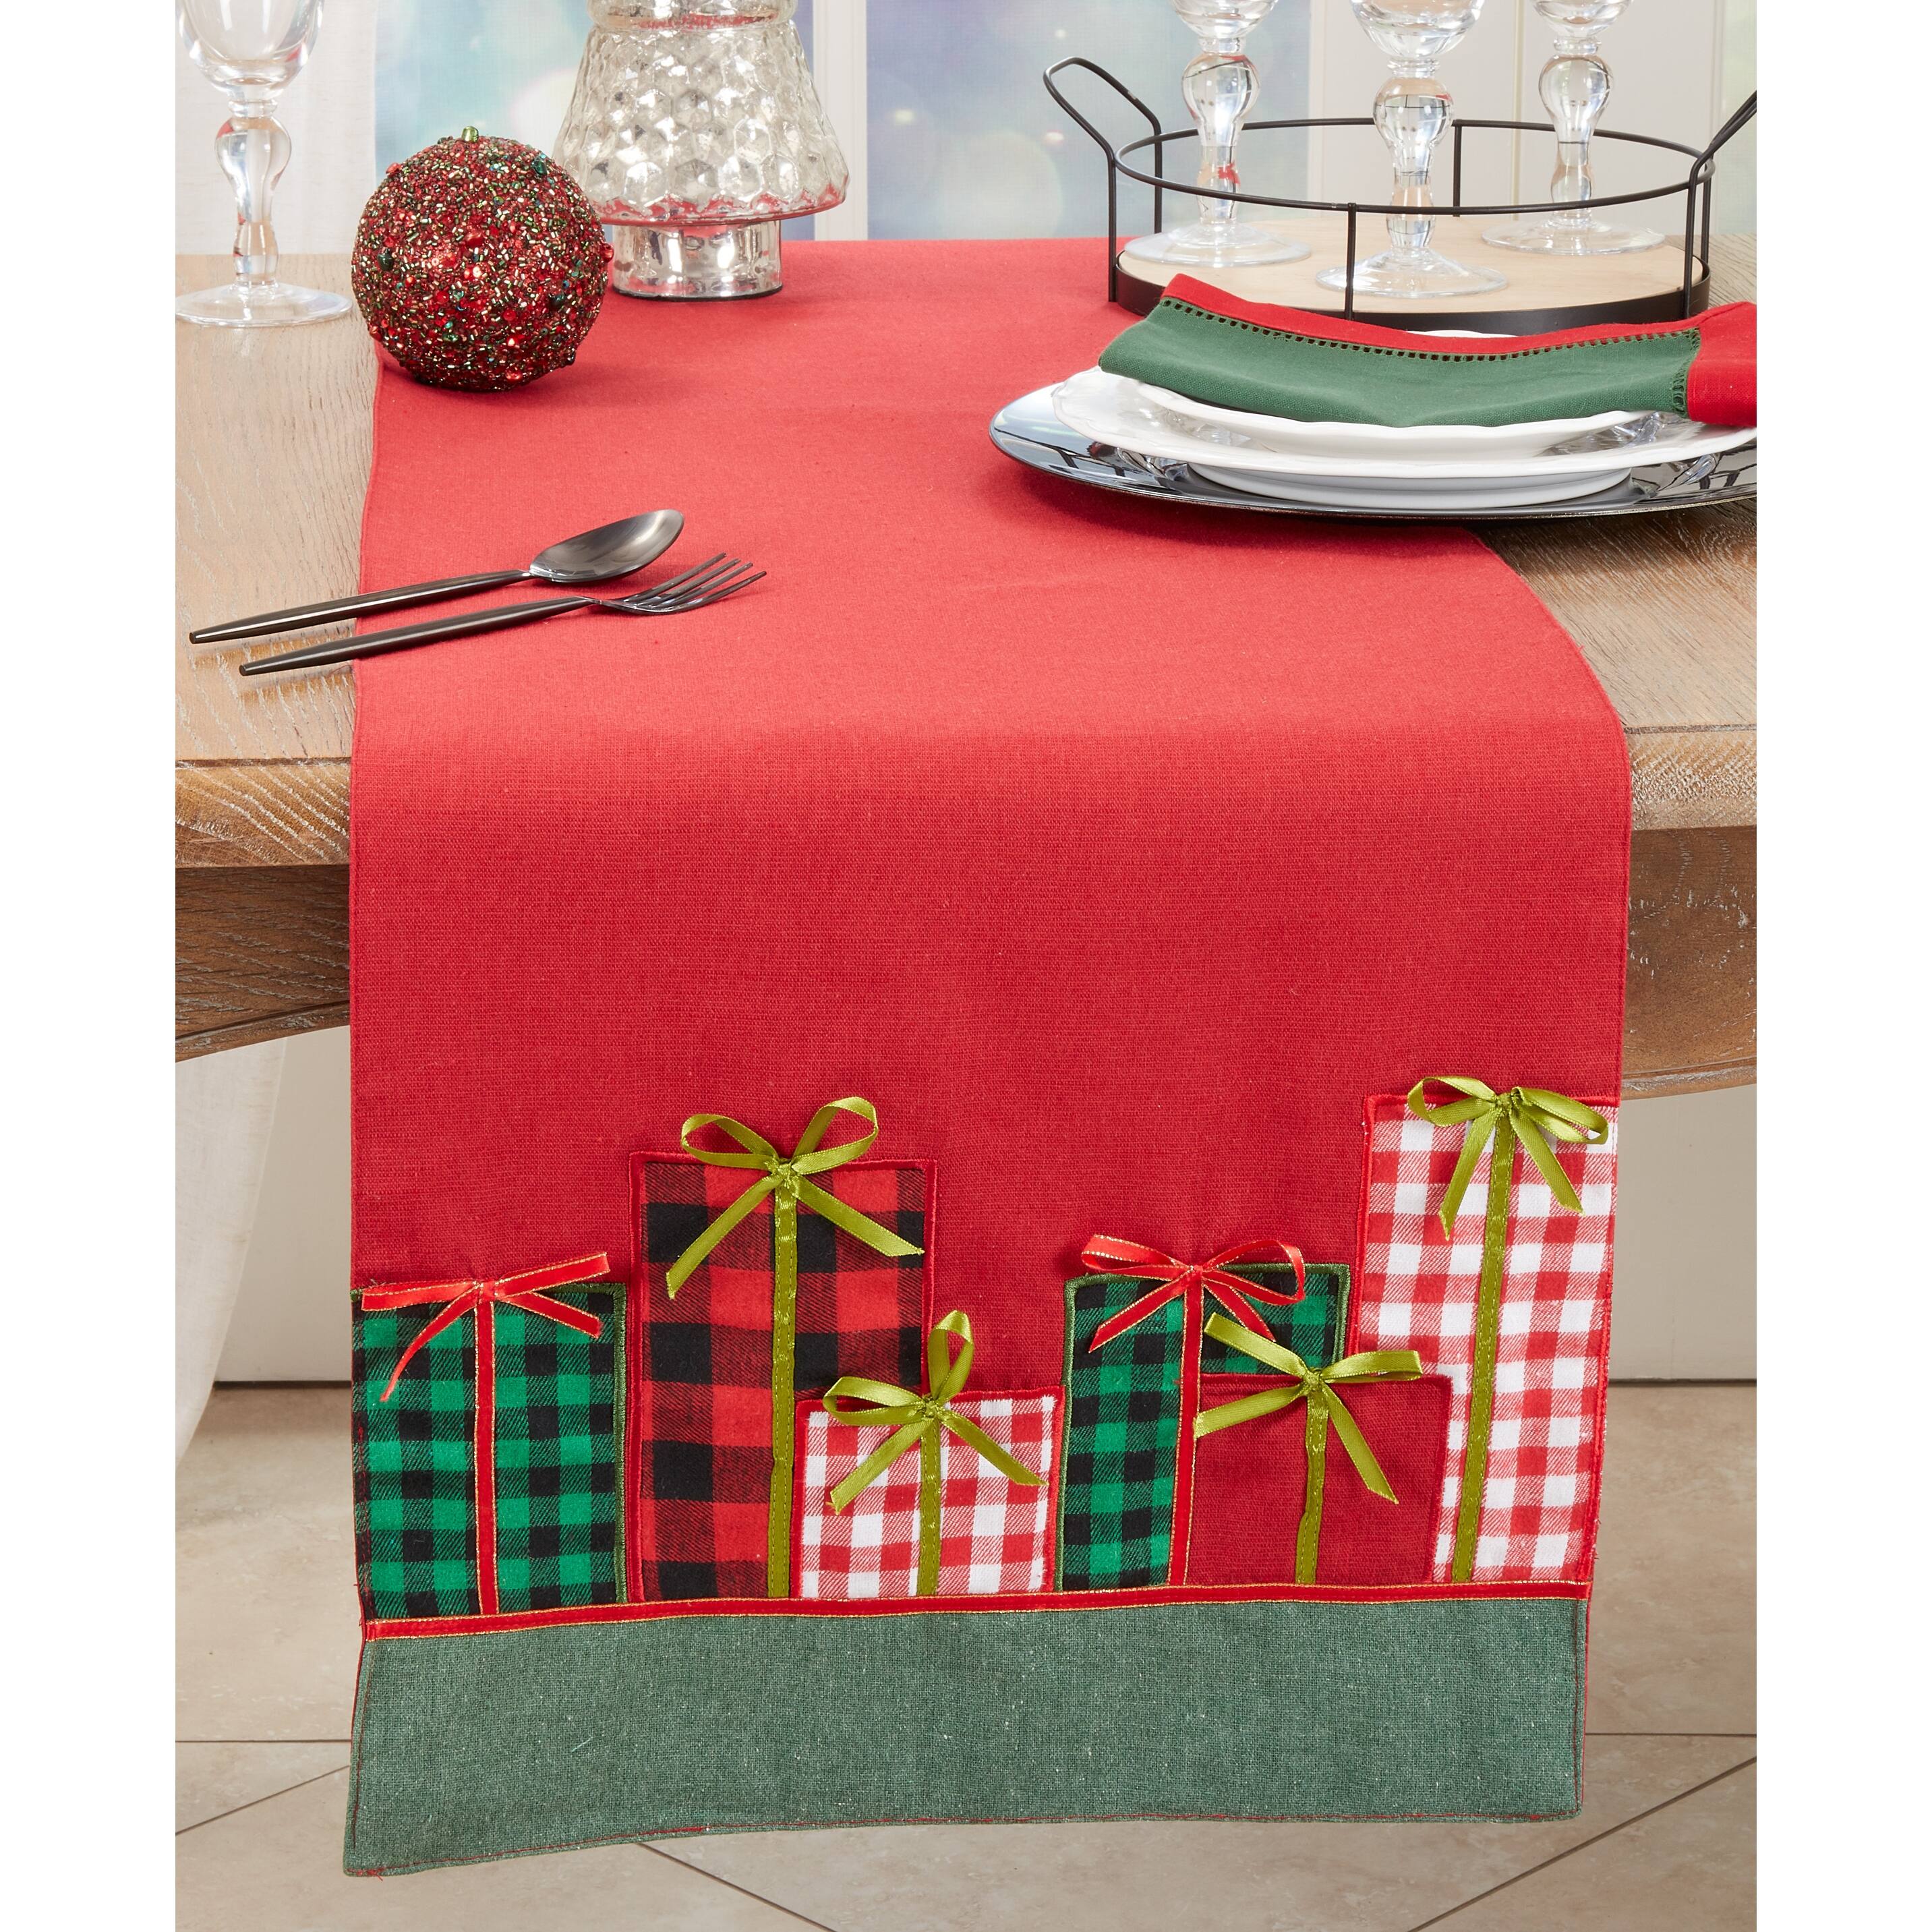 Merry and Bright Christmas Gifts Table Runner - 16"x72"